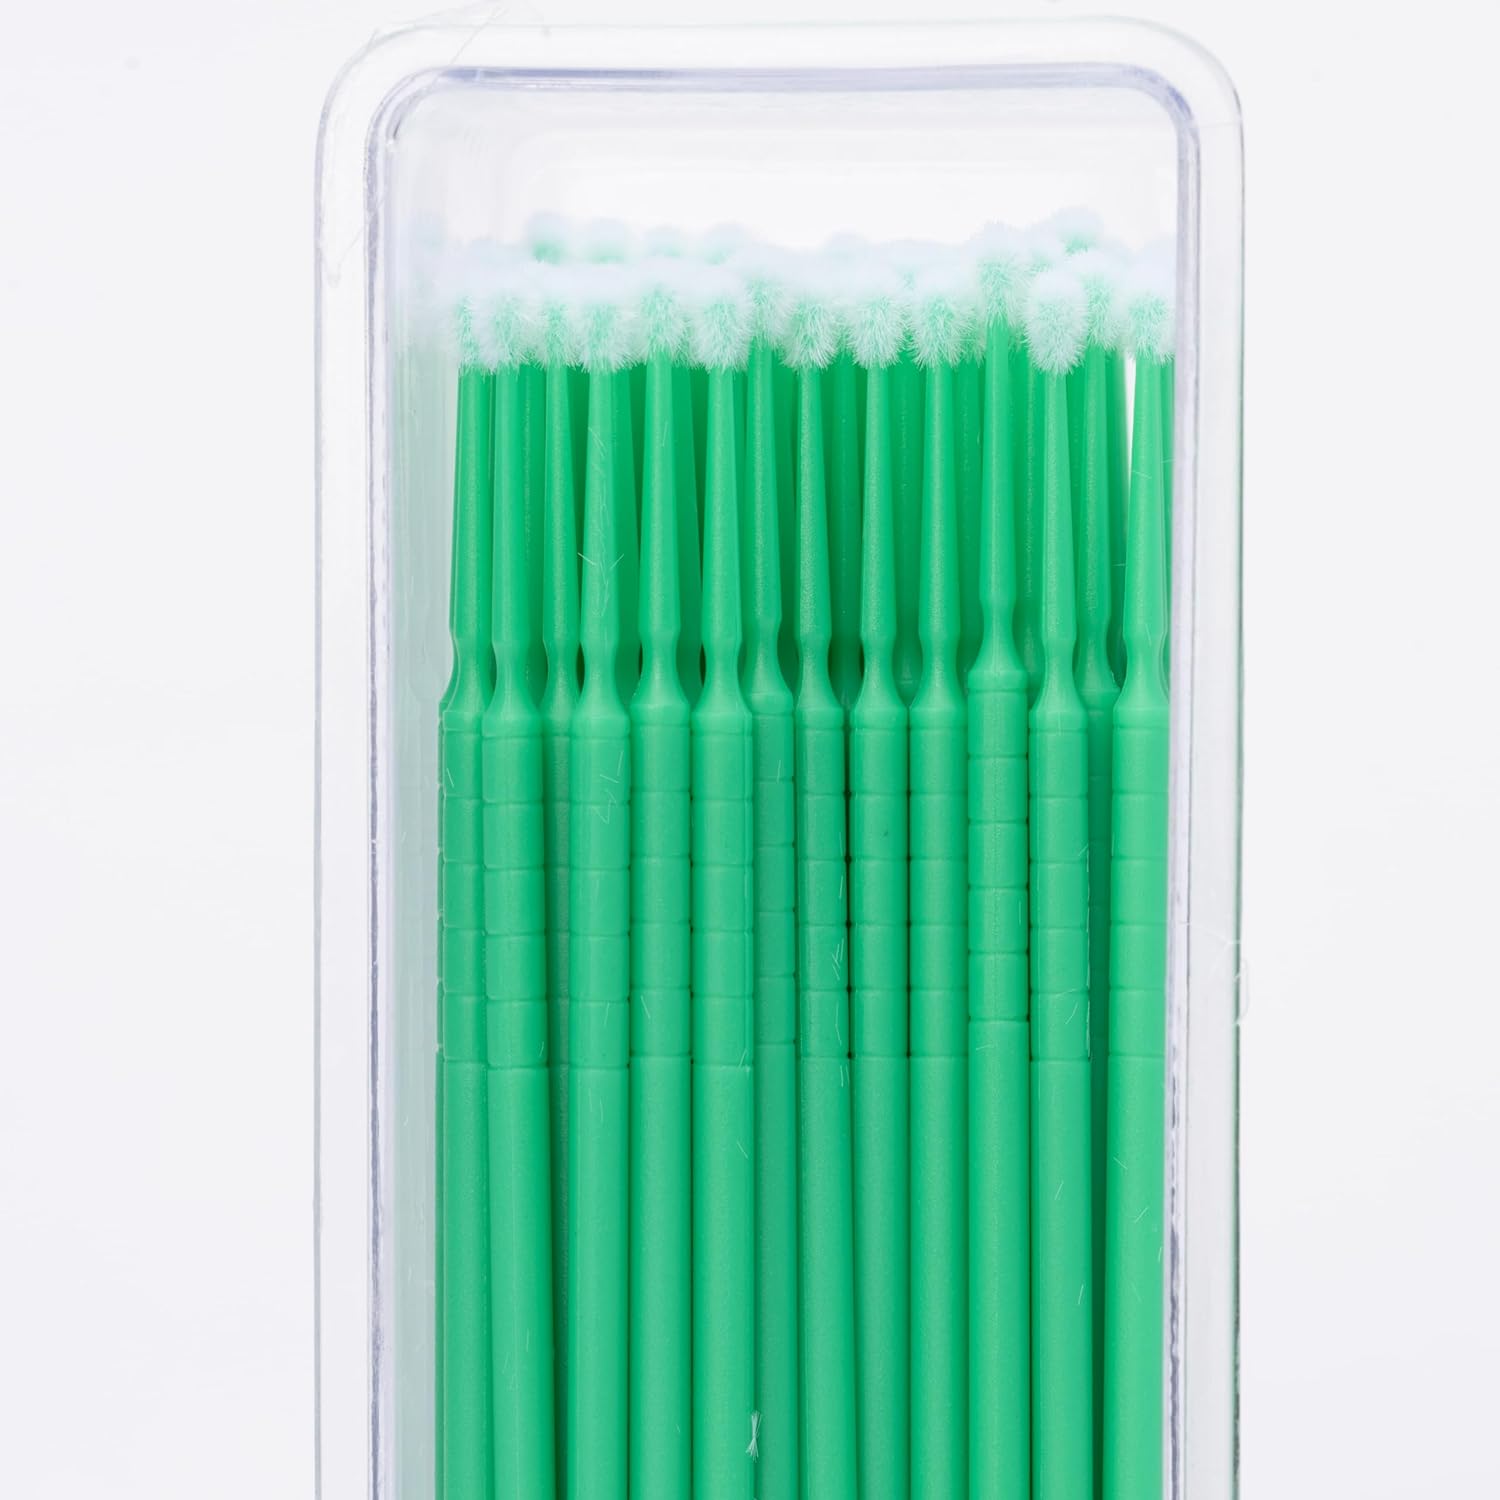 Henry Schein Bendable Micro Applicator, Fine Tip, Disposable, Bendable Neck for Precision Application - Latex-Free Microbrush Swabs for Dental, Medical, and Cosmetic Use